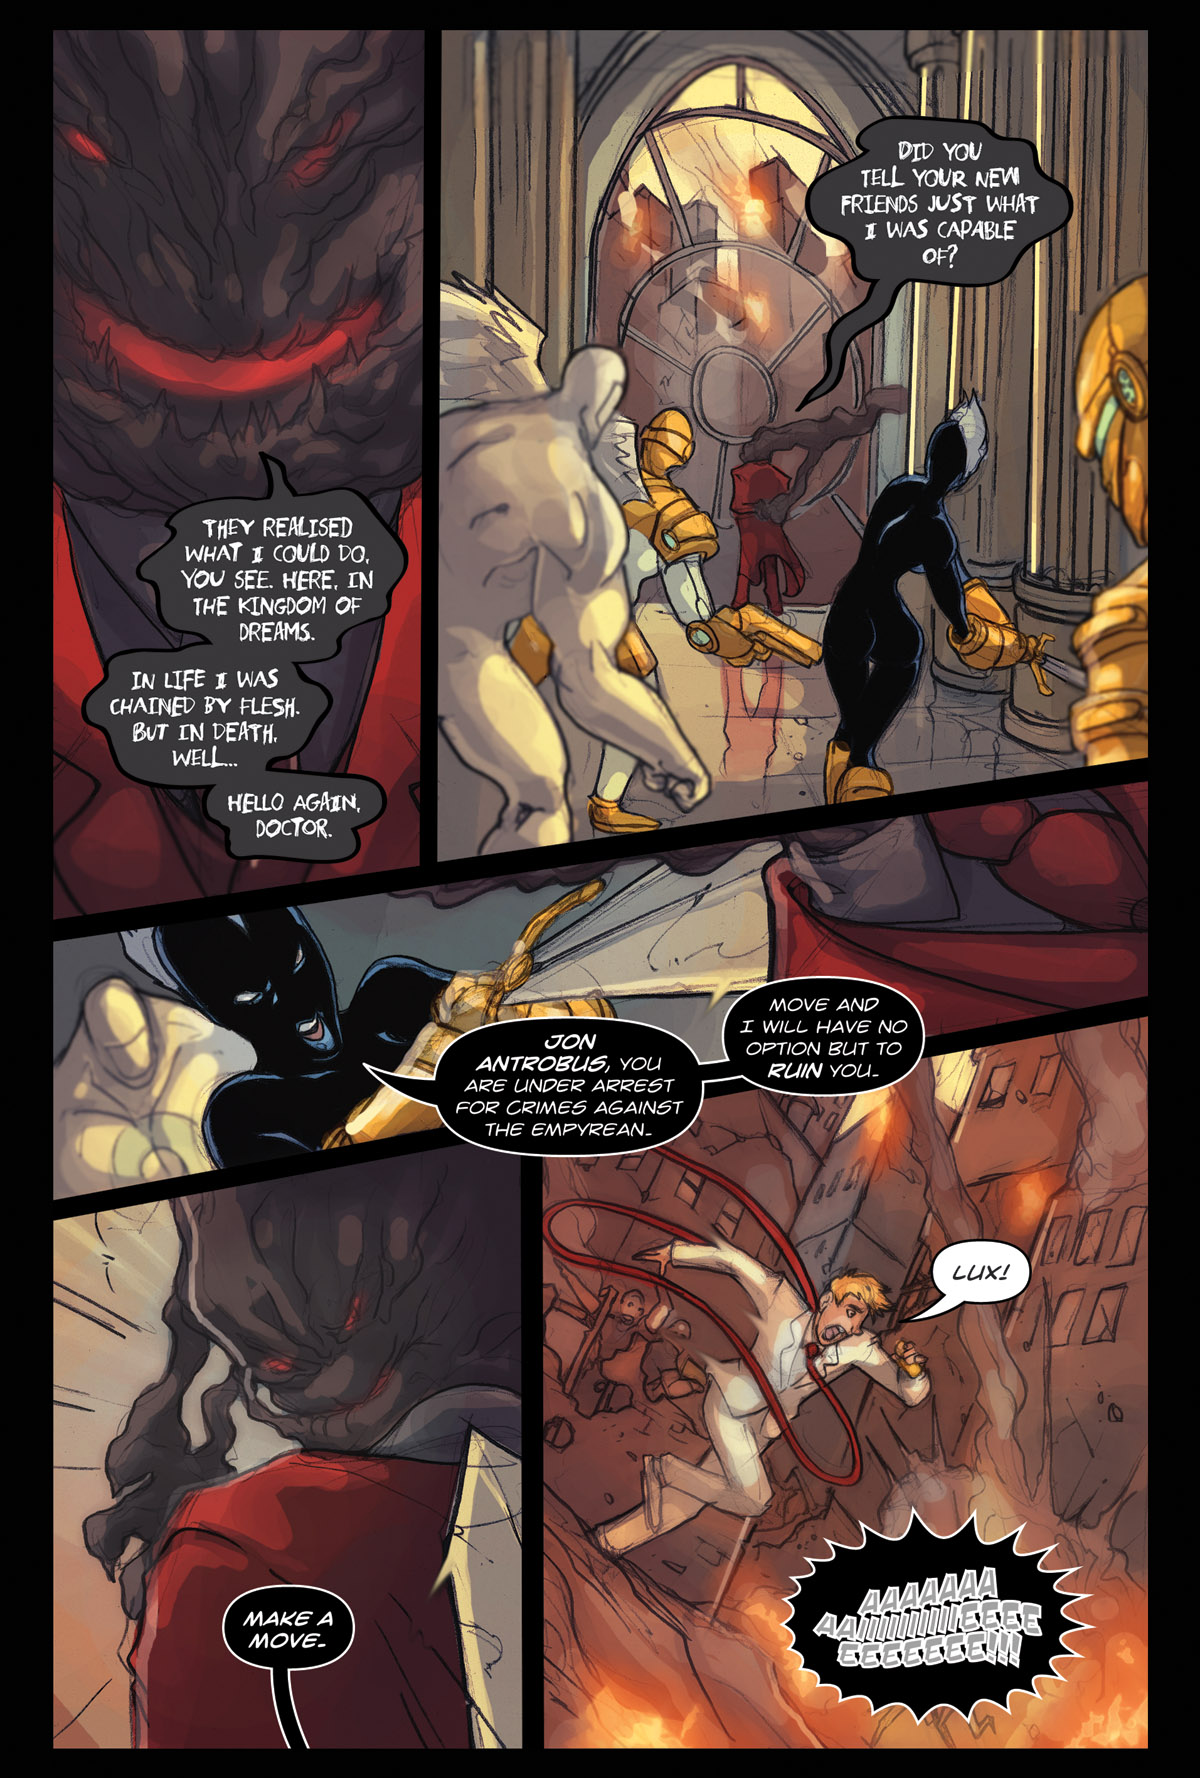 Afterlife Inc. | Near Life | Page 22